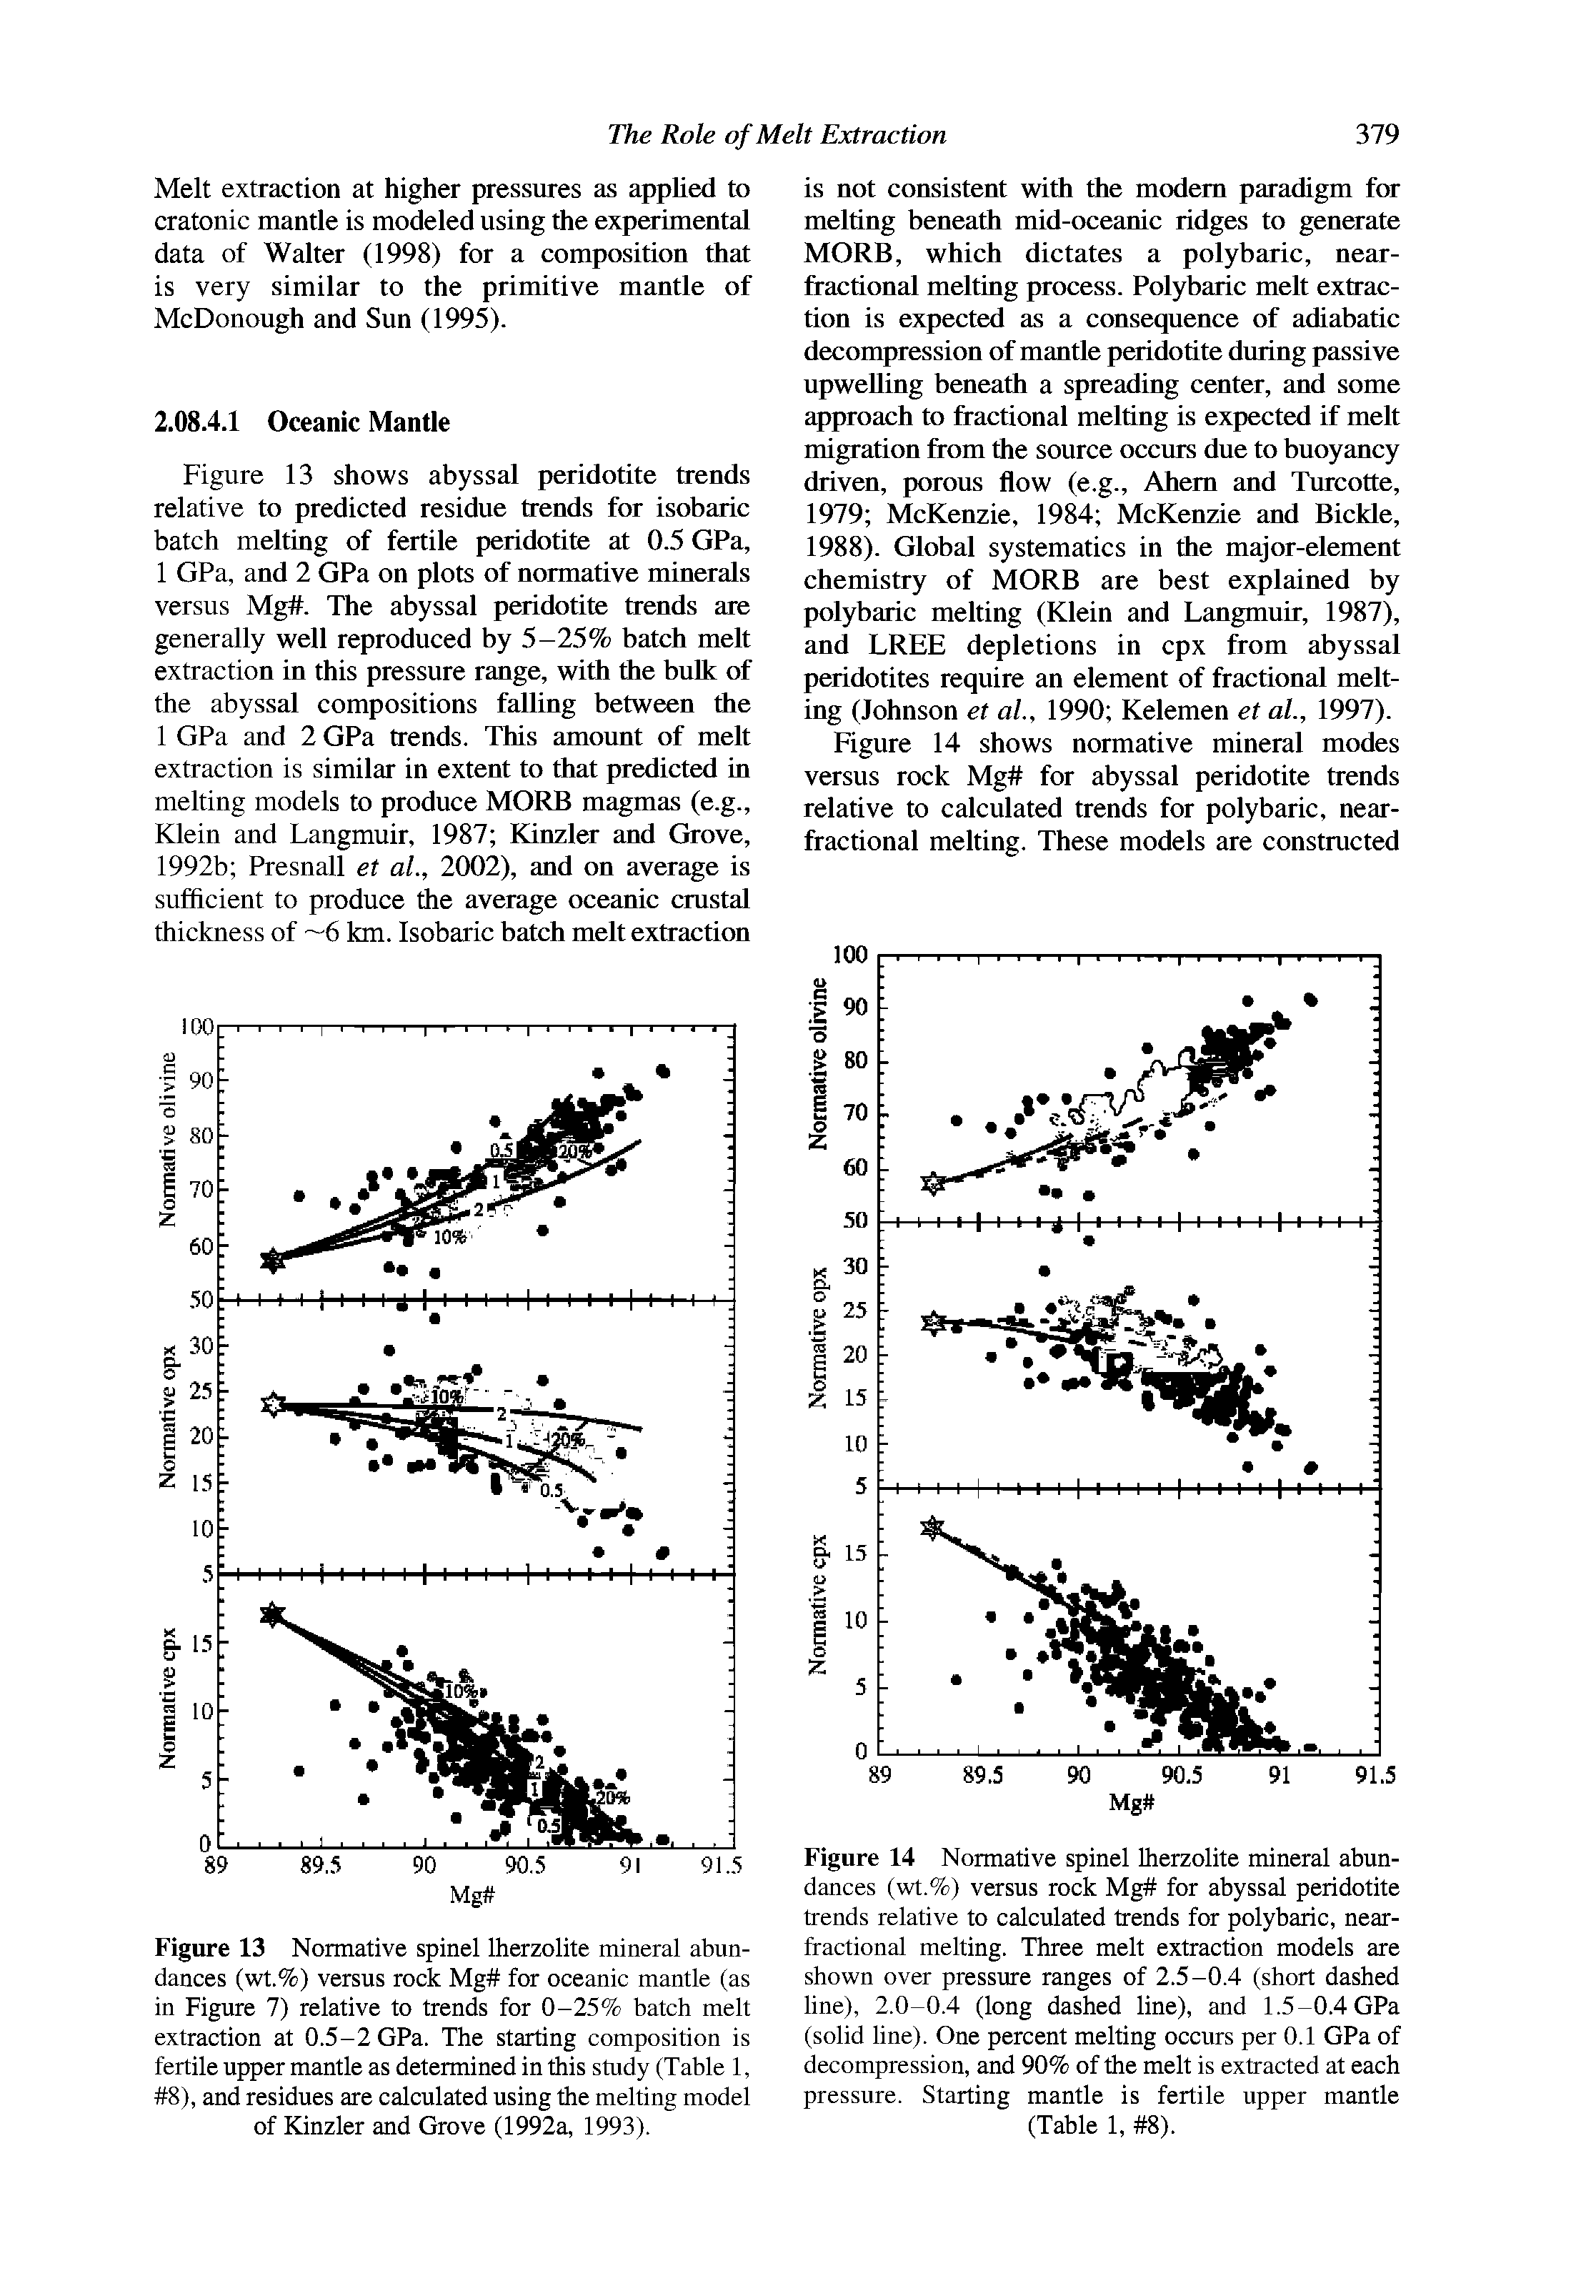 Figure 13 Normative spinel Iherzolite mineral abundances (wt.%) versus rock Mg for oceanic mantle (as in Figure 7) relative to trends for 0-25% batch melt extraction at 0.5-2 GPa. The starting composition is fertile upper mantle as determined in this study (Table 1, 8), and residues are calculated using the melting model of Kinzler and Grove (1992a, 1993).